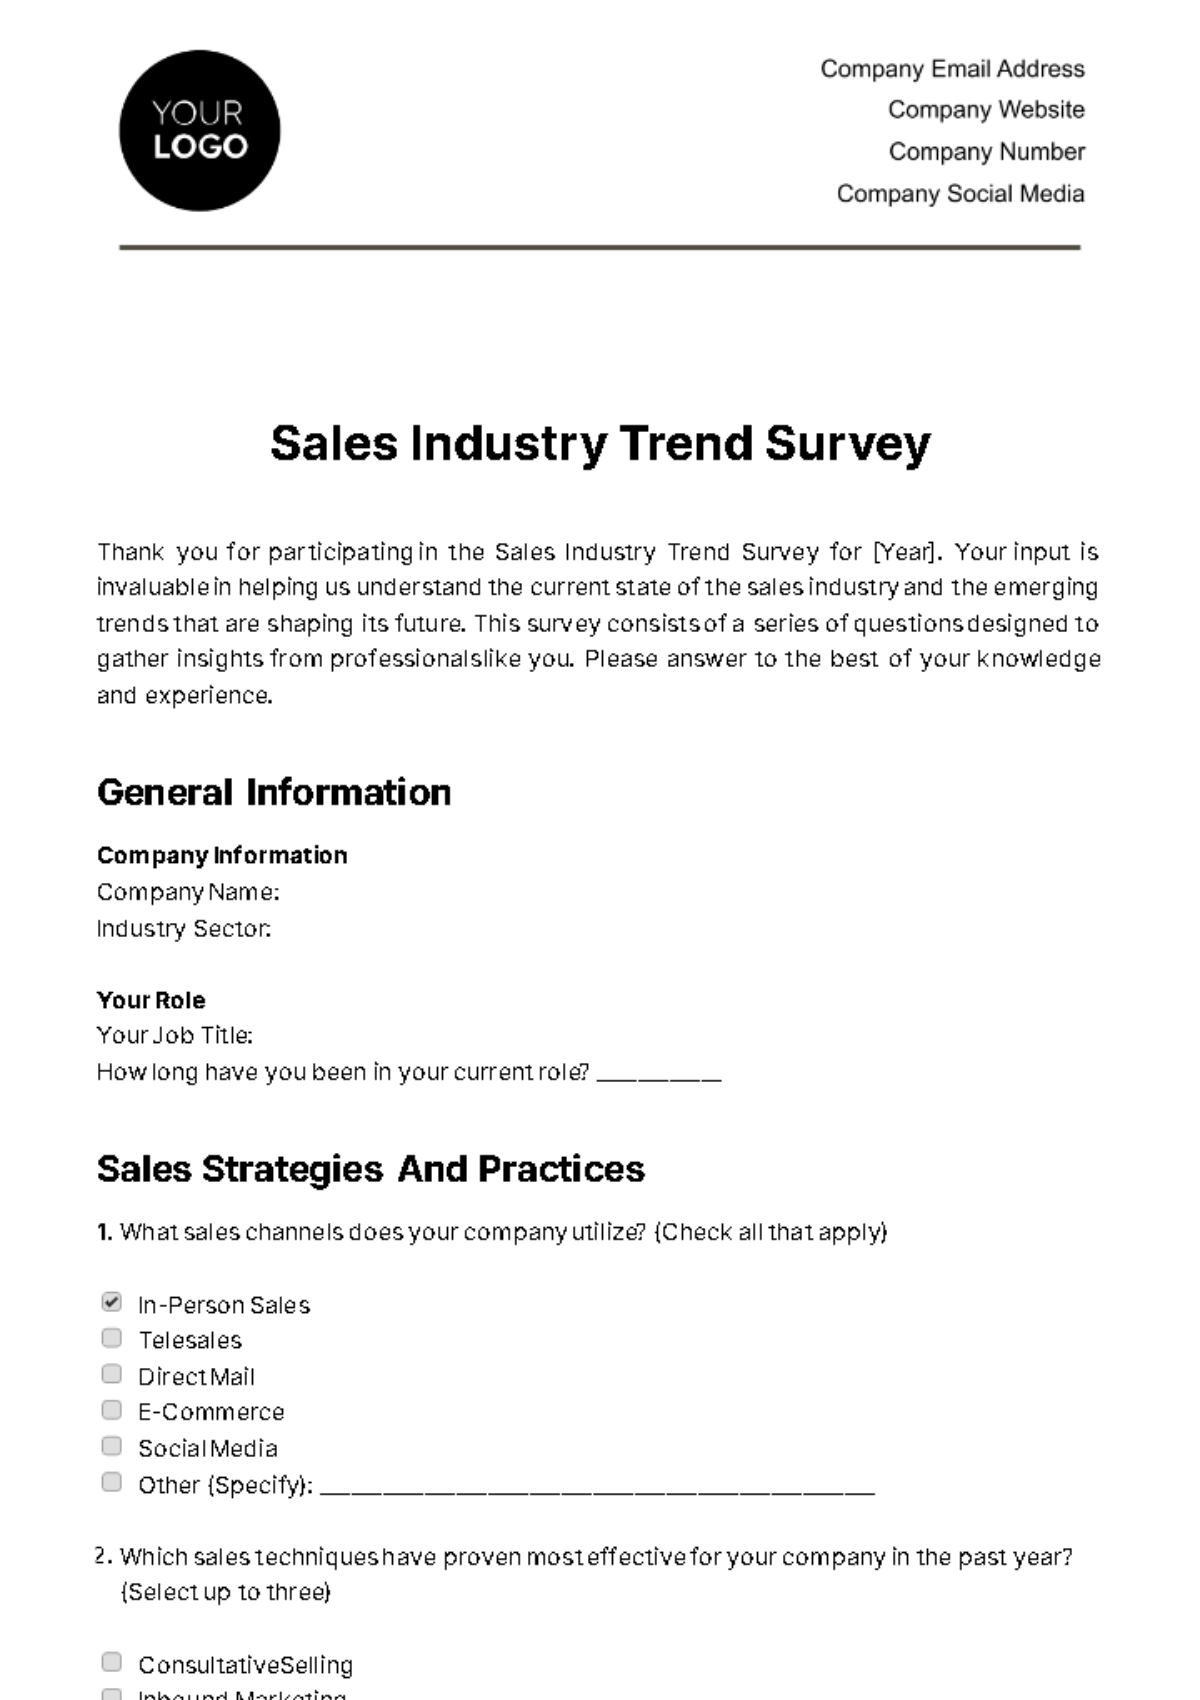 Sales Industry Trend Survey Template